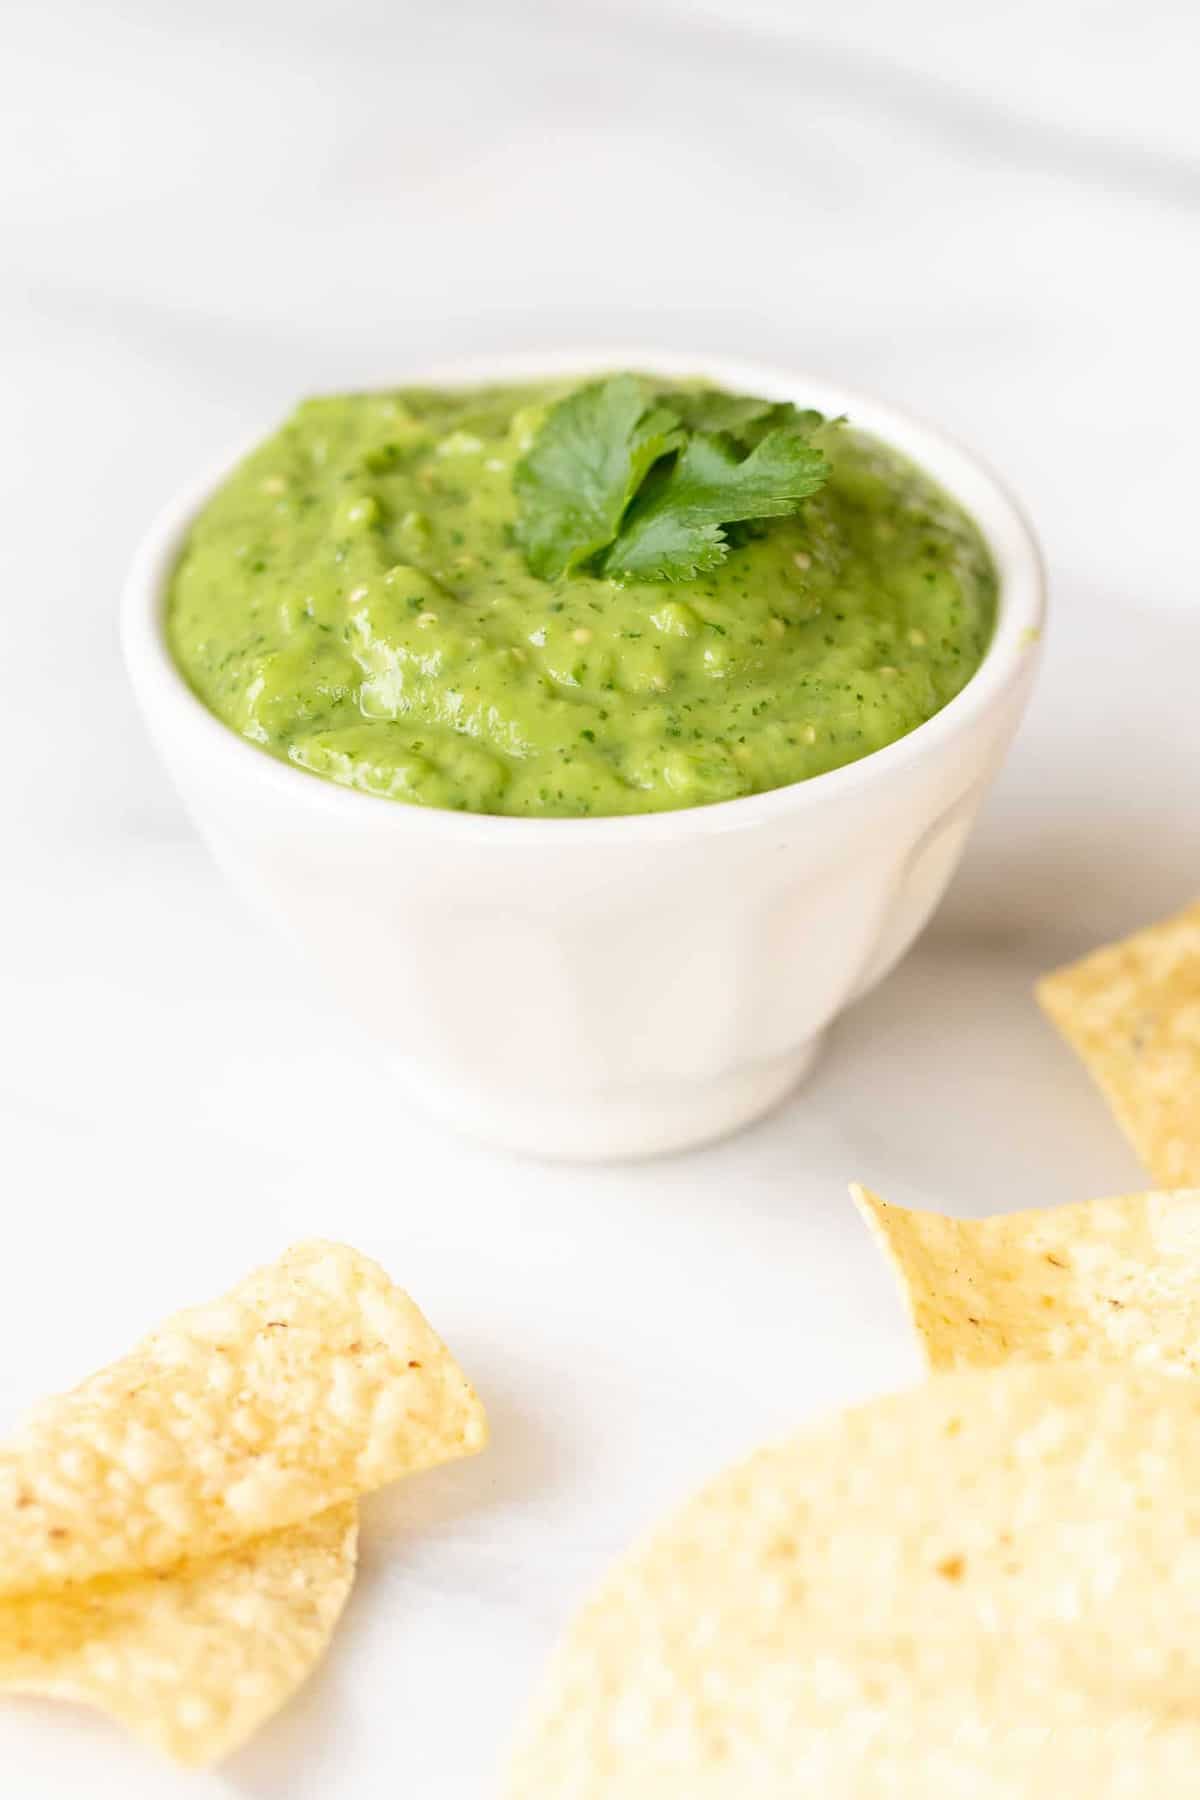 A white bowl of avocado sauce, tortilla chips scattered around.